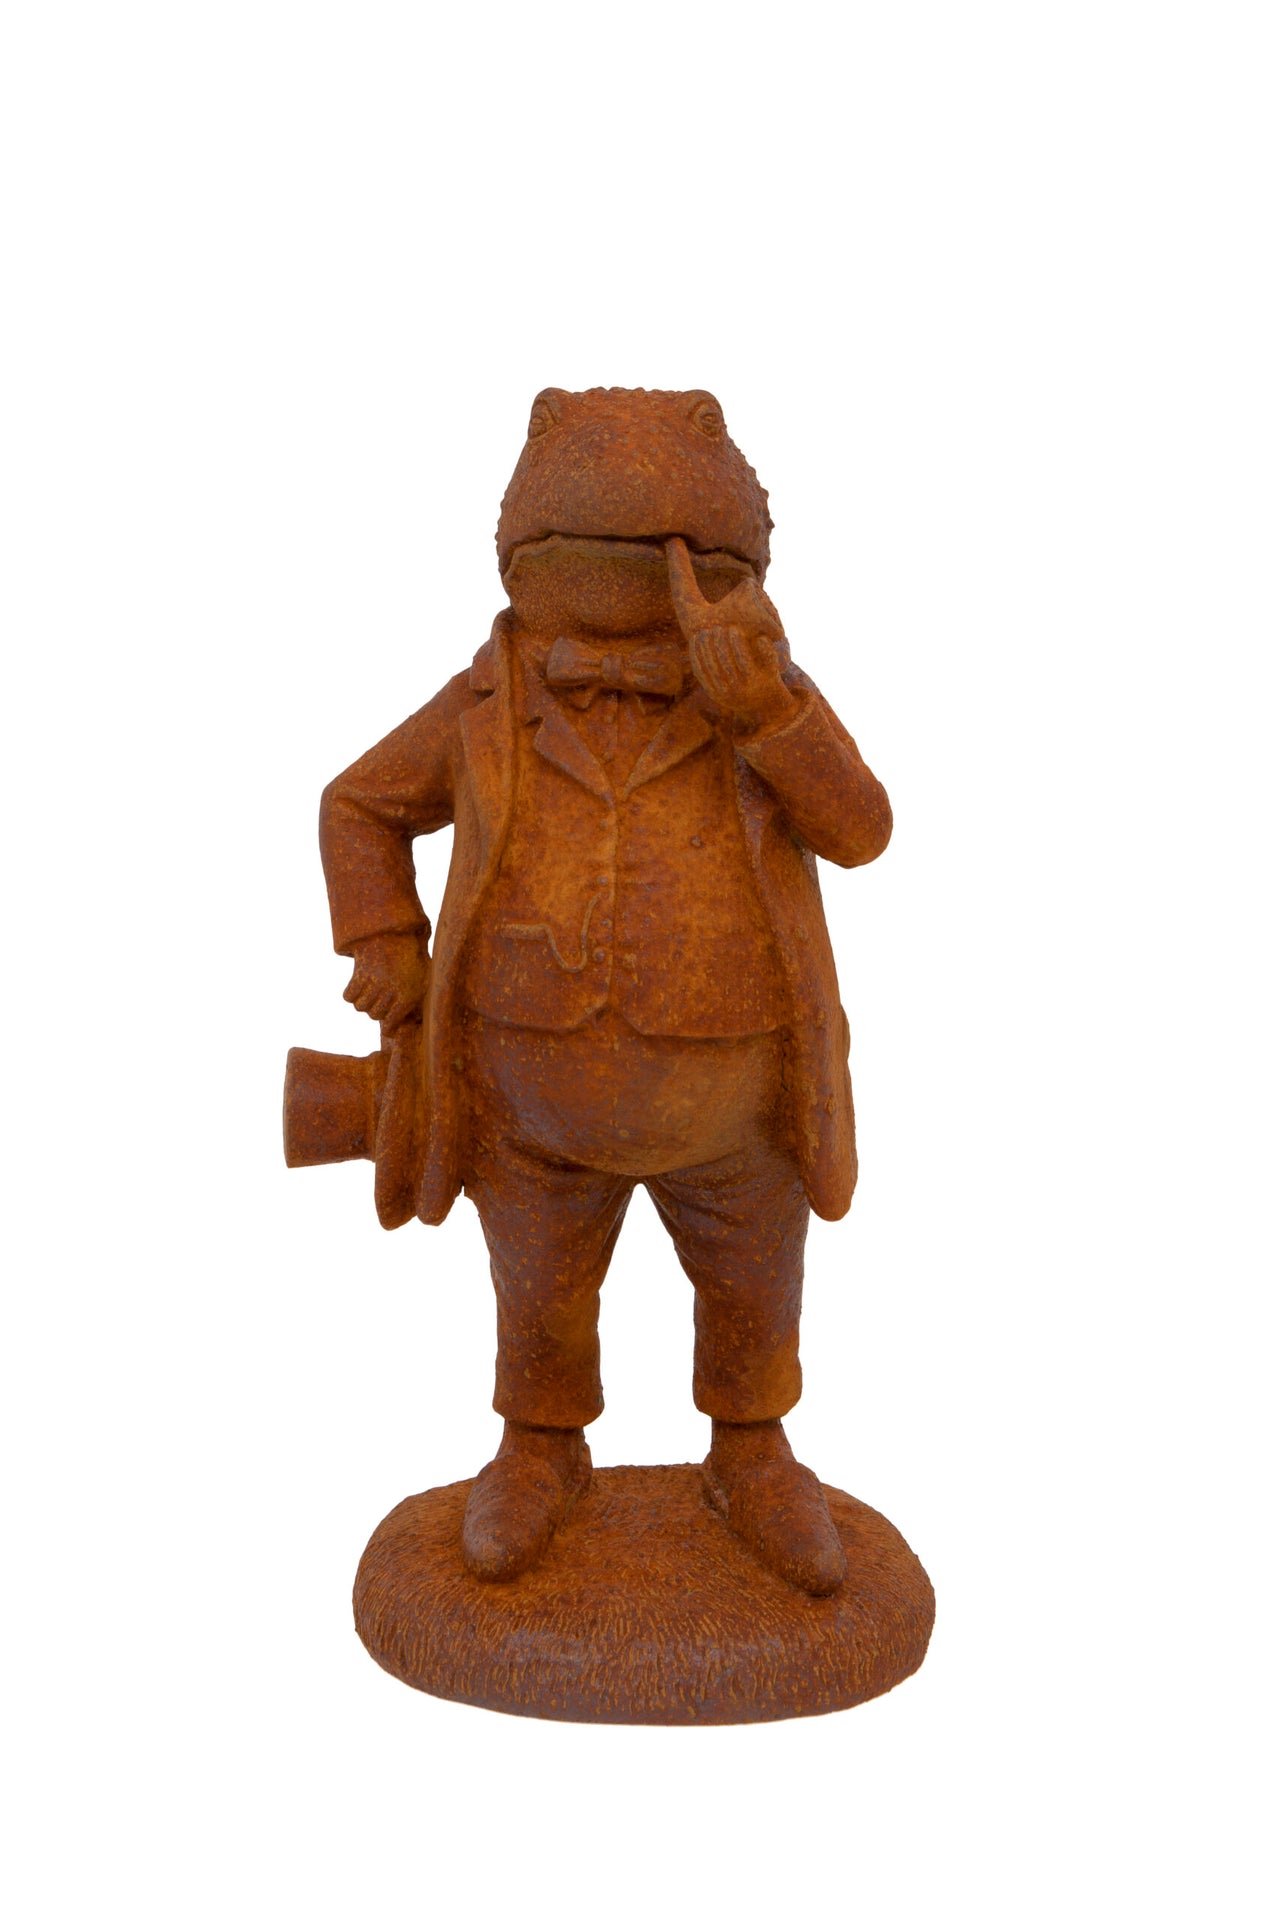 London Ornaments Rust Mr. Toad Character Statue